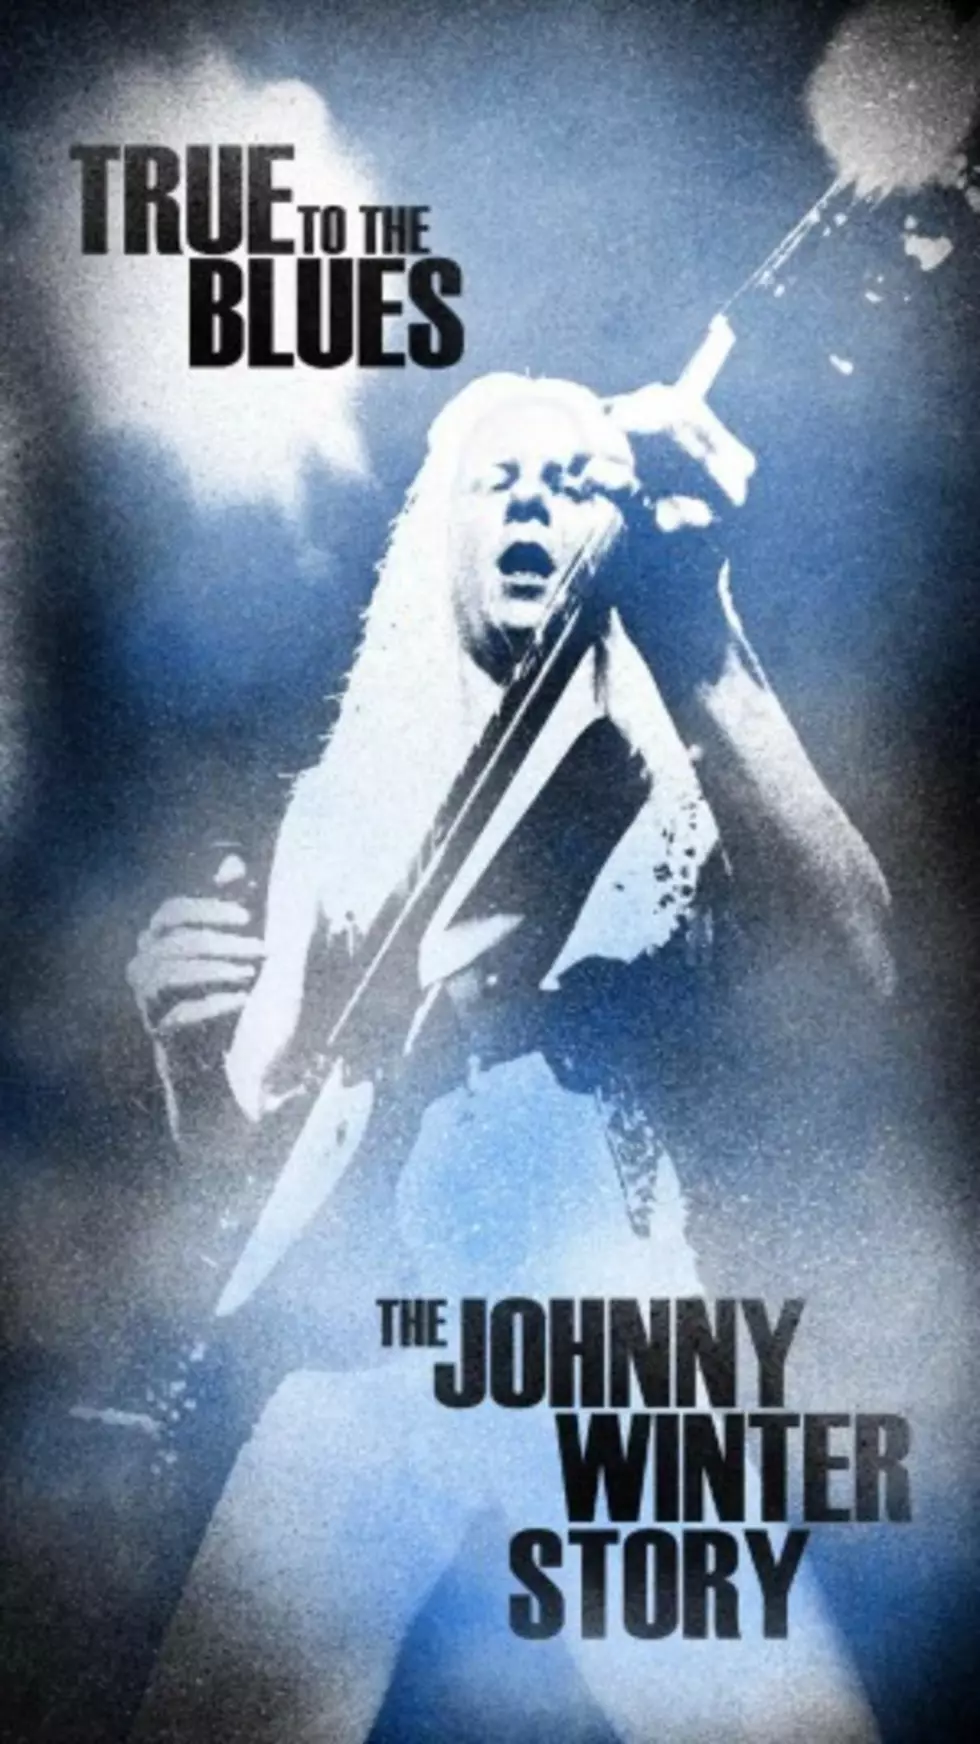 Johnny Winter, &#8216;True to the Blues: The Johnny Winter Story&#8217; &#8211; Album Review